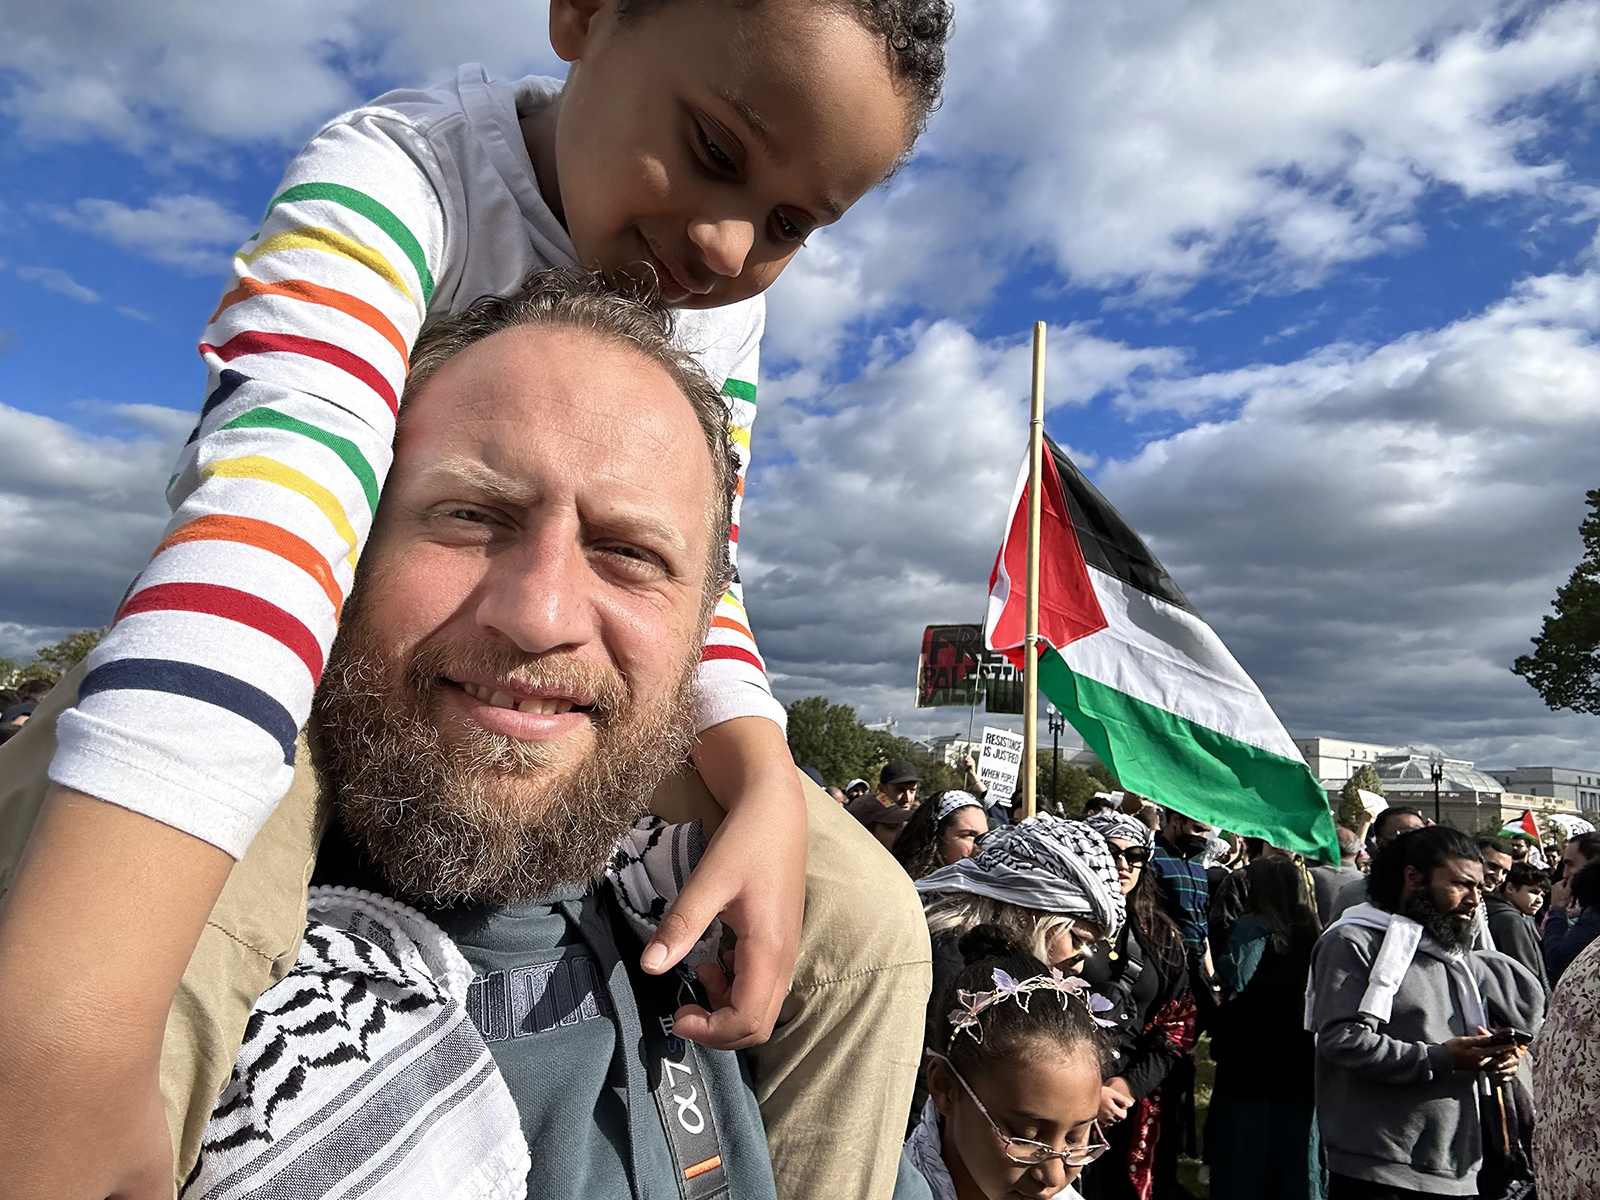 Anwar Arafat holds his youngest son while attending a demonstration in support of Palestinians, Friday, Oct. 20, 2023, in Washington, D.C. Photo courtesy Arafat